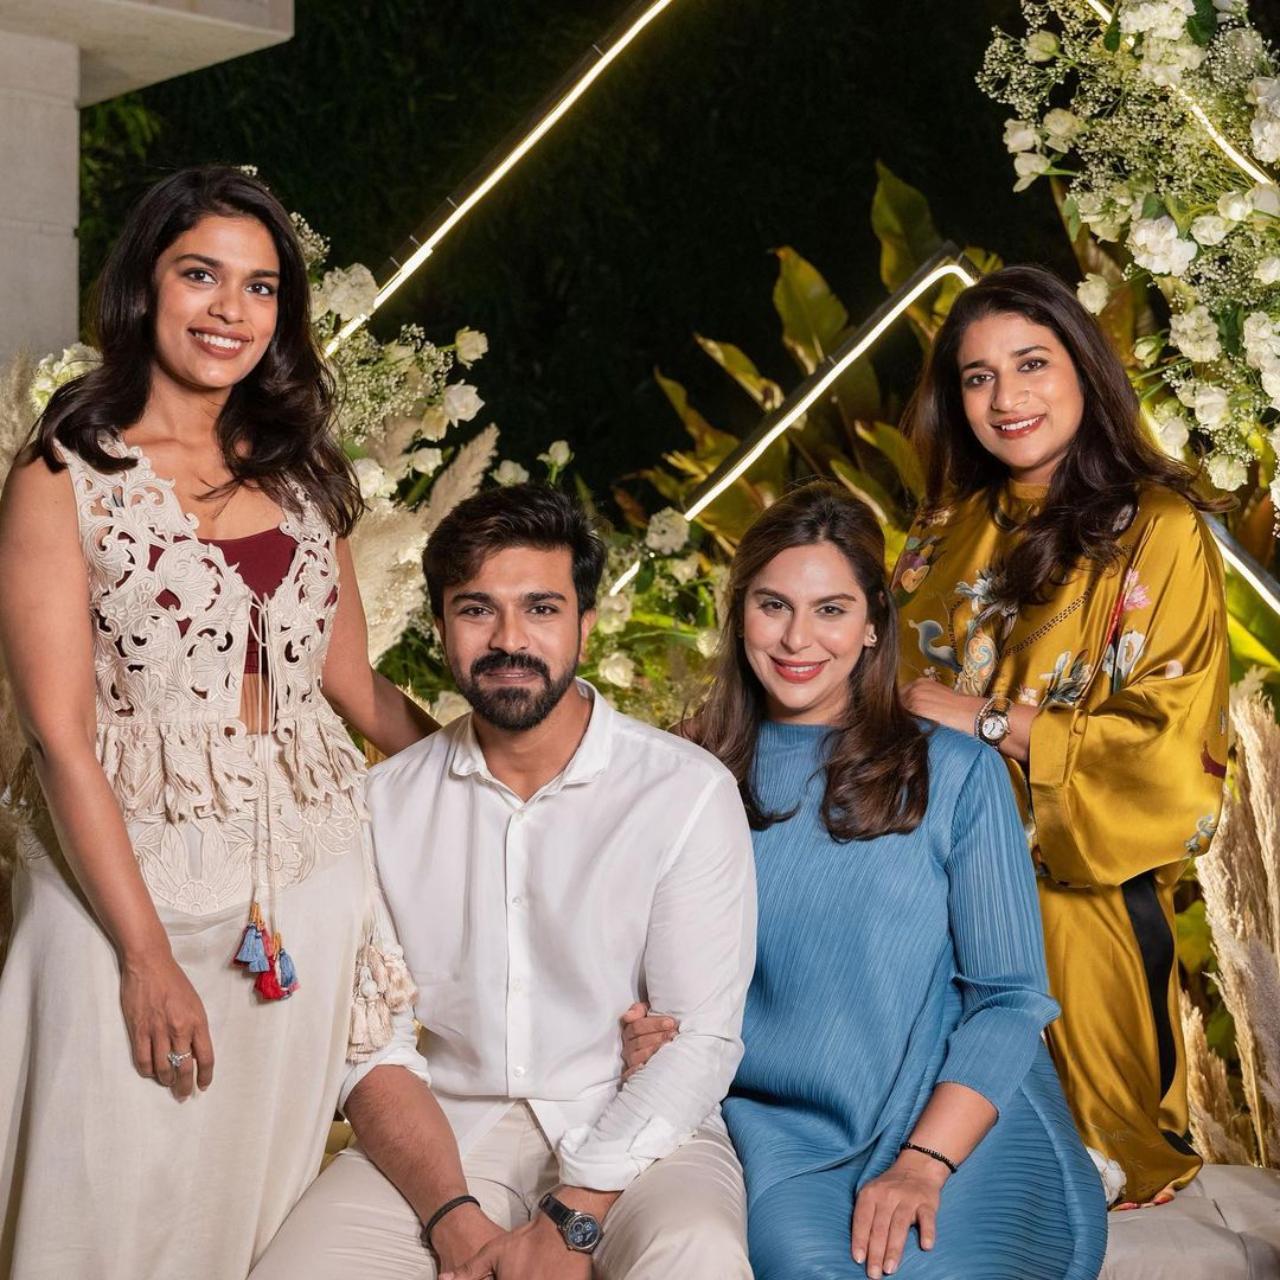 Upasana's girlfriends also threw her another baby shower in Dubai. The perfectly designed event - from the white theme, to the personalized cake and adorable baby accessories around the venue made headlines once again. Upasana, who was in her seventh month of pregnancy thanked her 'sisters' for the 'best baby shower ever'